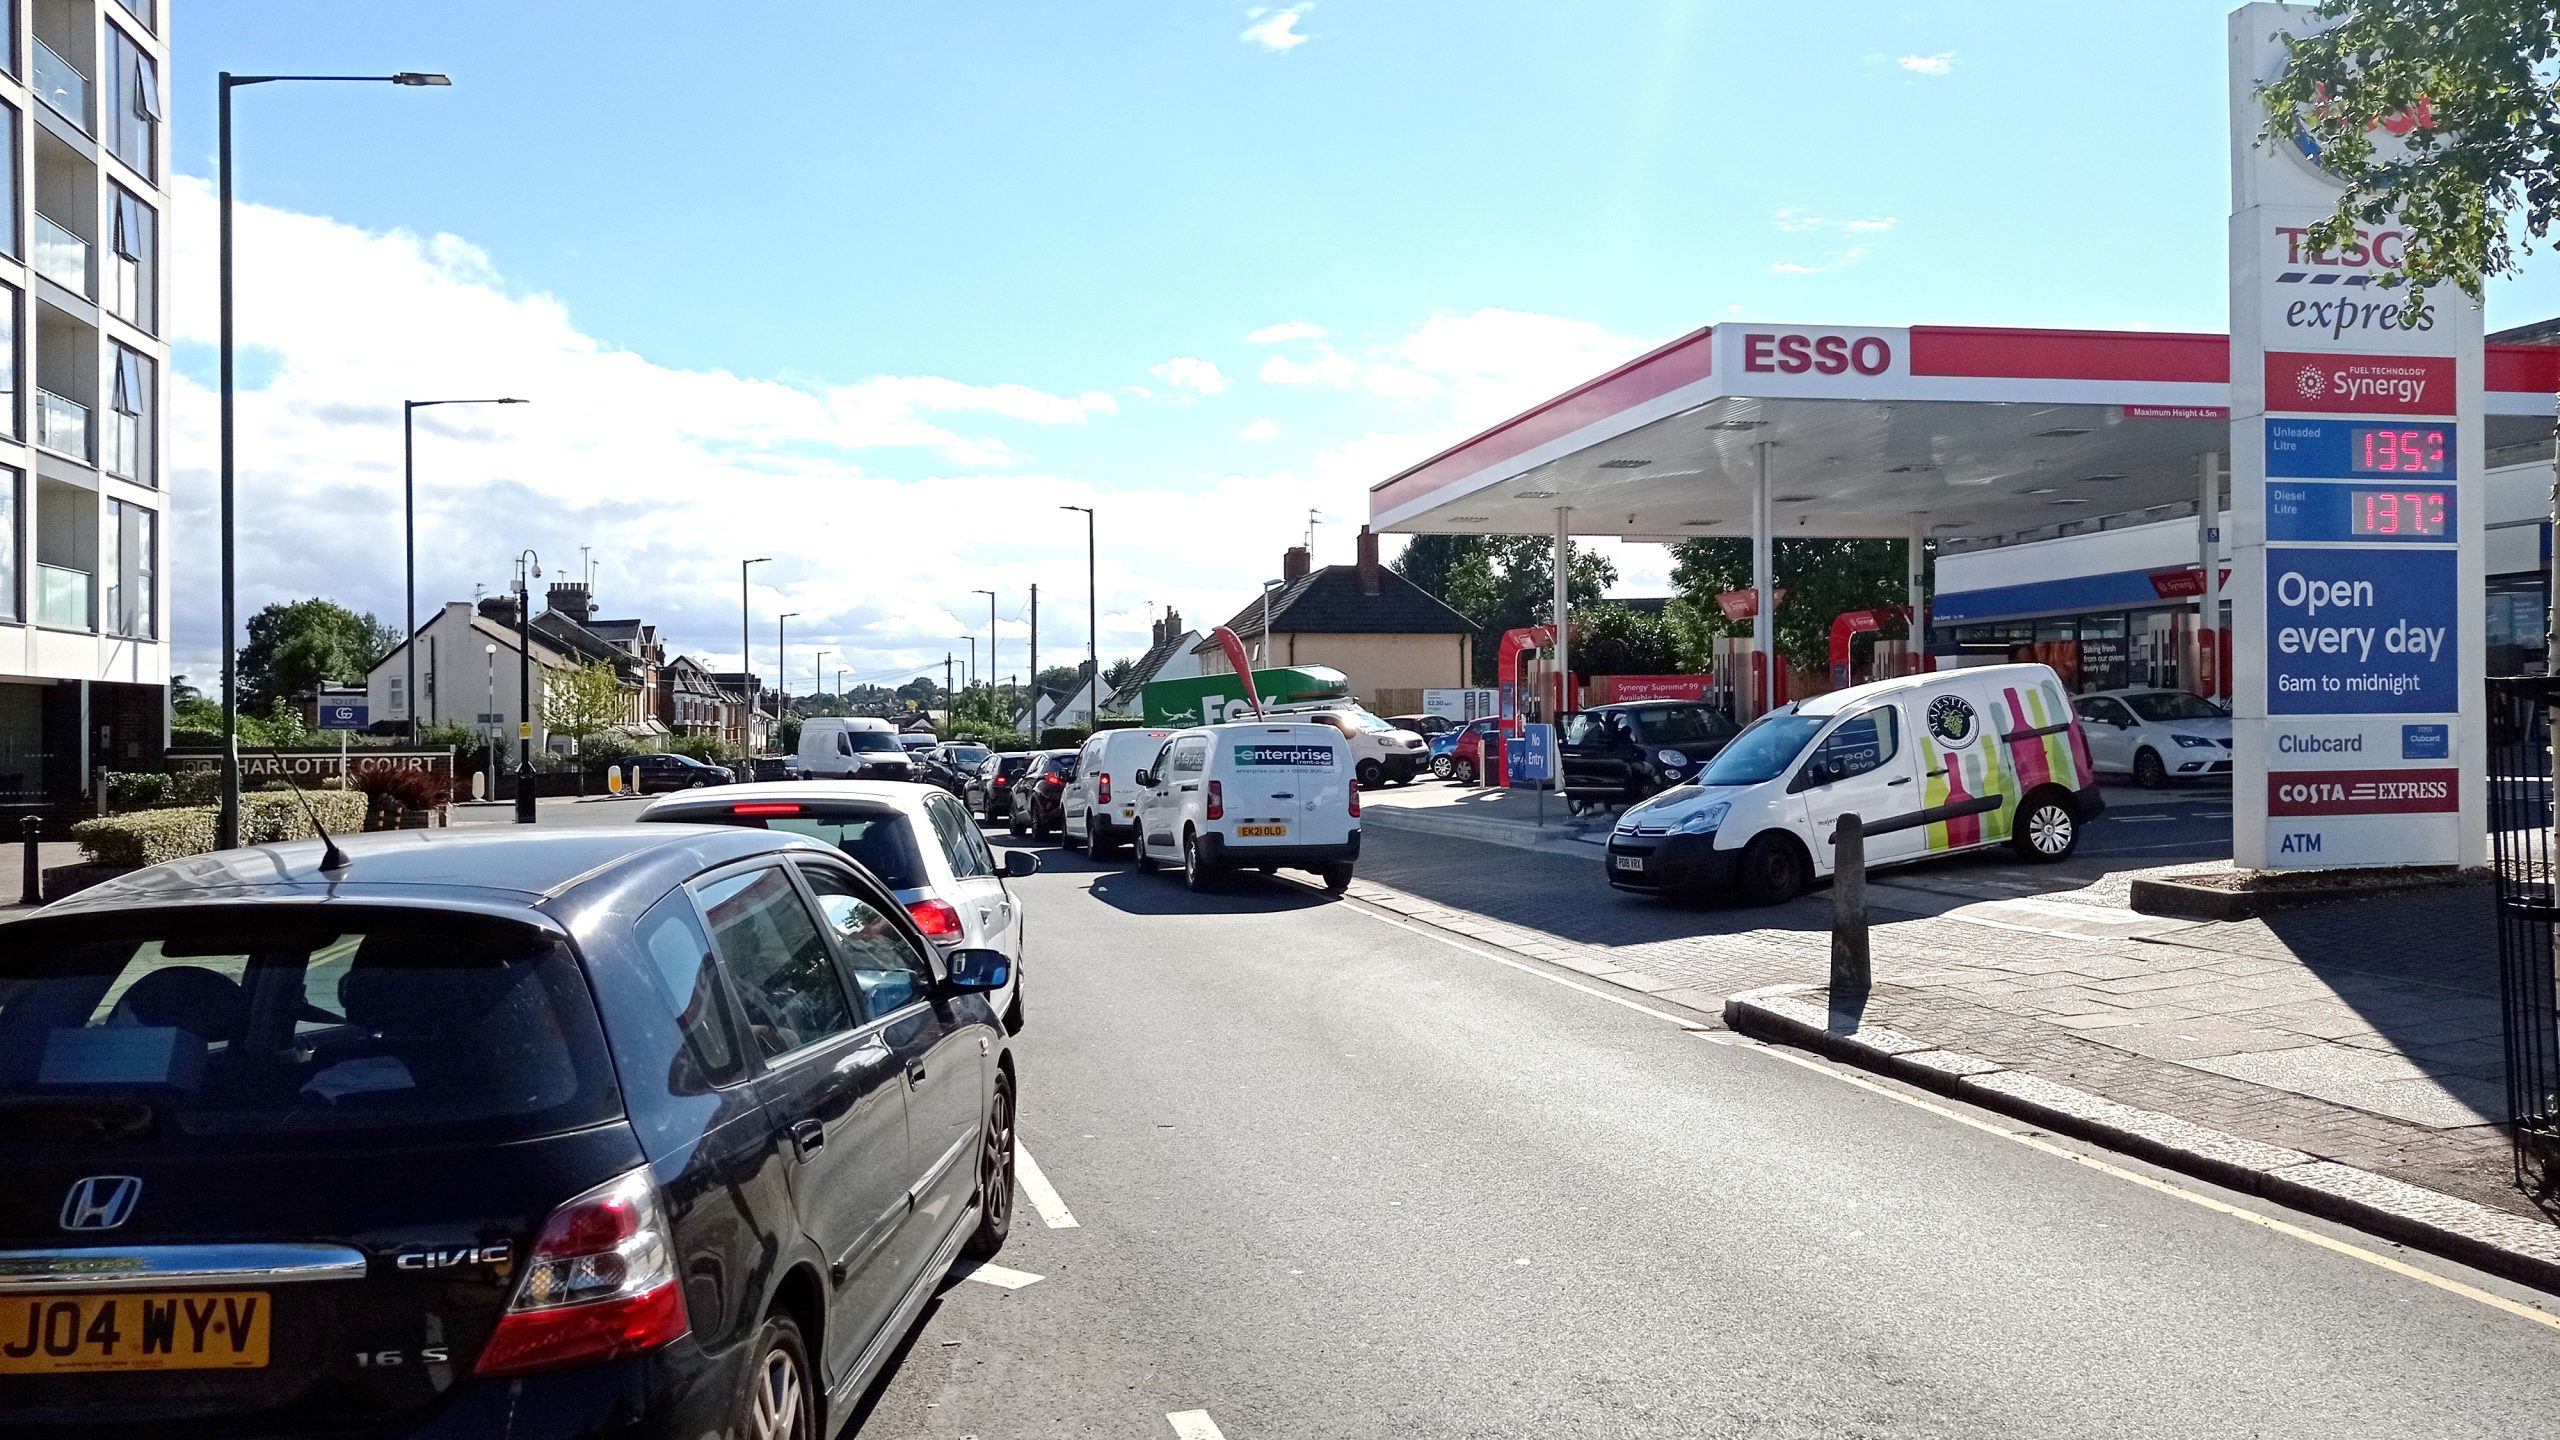 Queues for fuel at East Barnet Esso service station 27 September 2021 03 scaled.